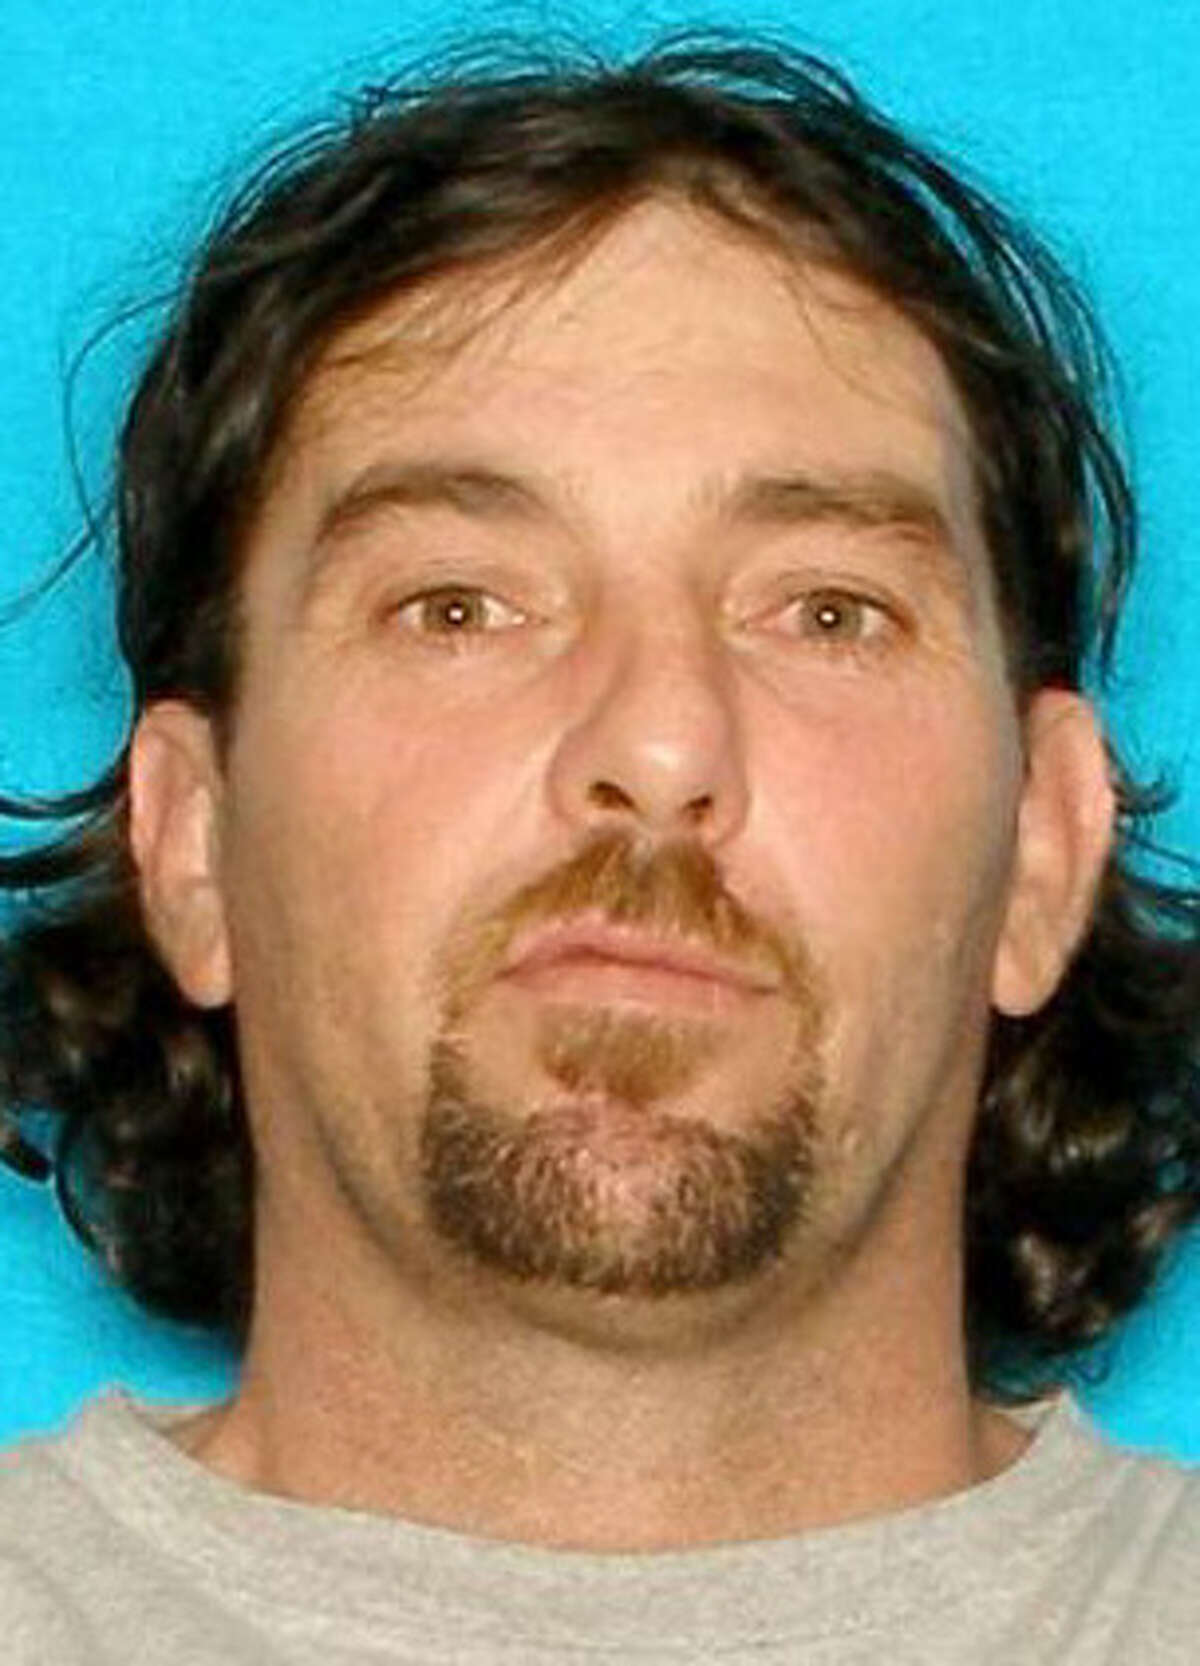 Daniel Goodwin, 41, seen in an undated driver's license photo, was shot in the chest at a 2012 family barbecue.